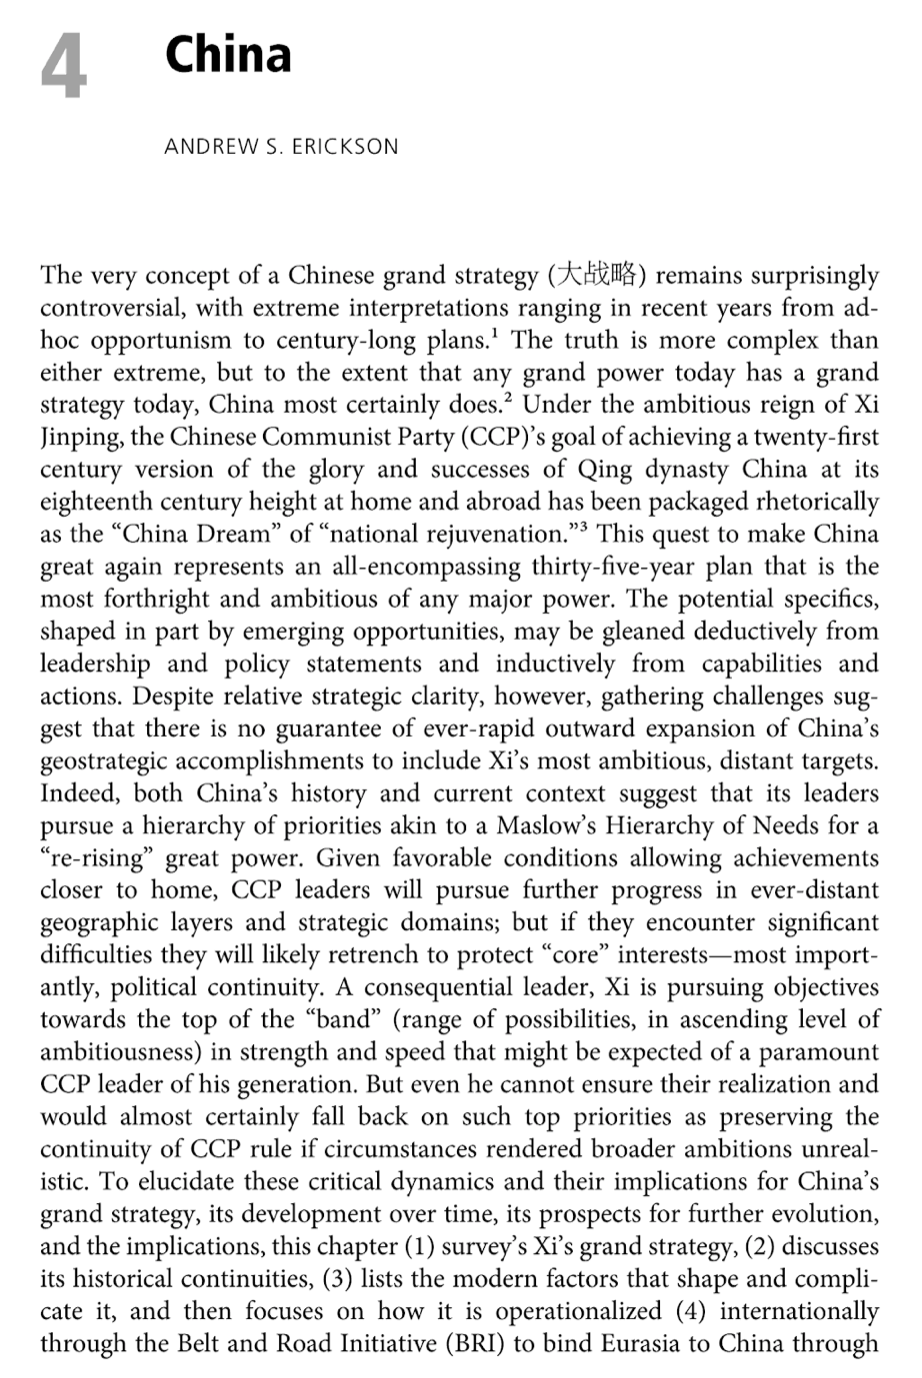 “China,” in Thierry Balzacq, Peter Dombrowski, and Simon Reich, eds., Comparative Grand Strategy: A Framework and Cases (Oxford, UK: Oxford University Press, 2019), 73.